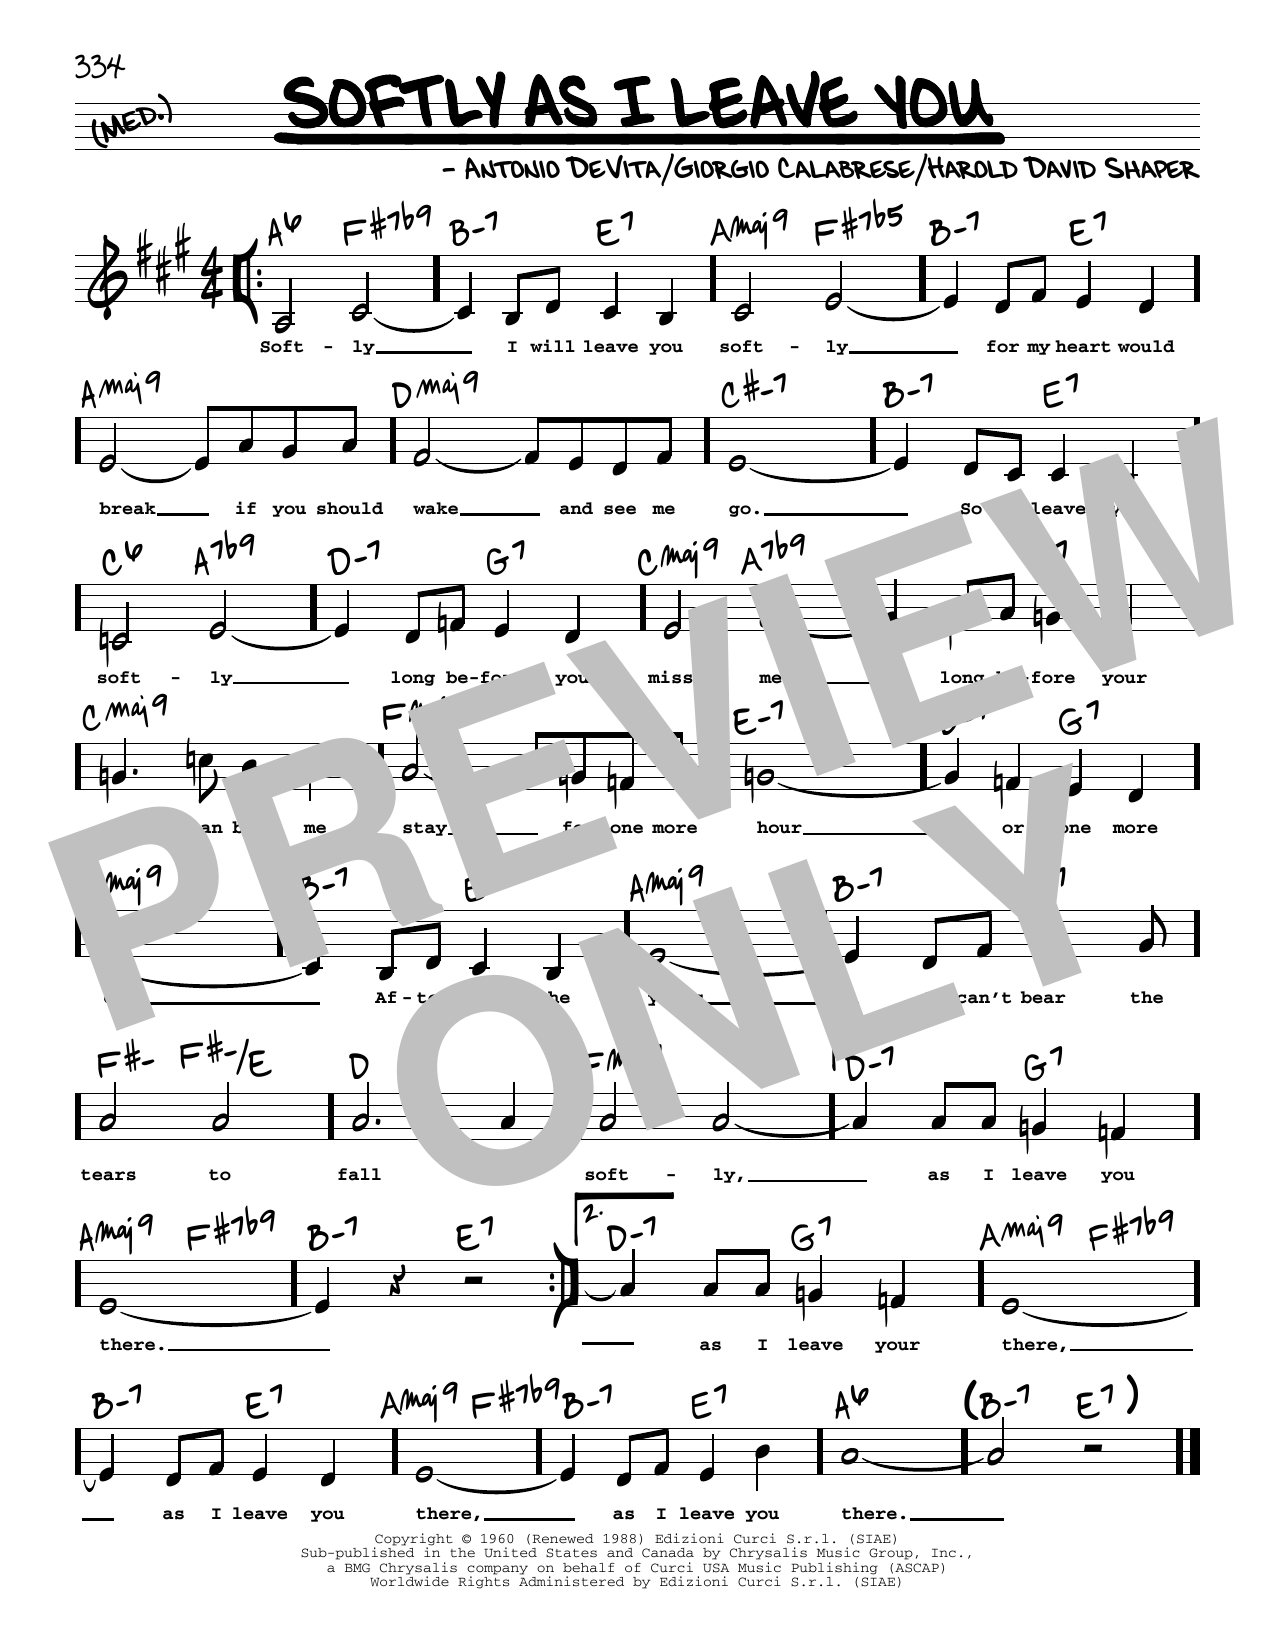 Frank Sinatra Softly As I Leave You (Low Voice) sheet music notes printable PDF score